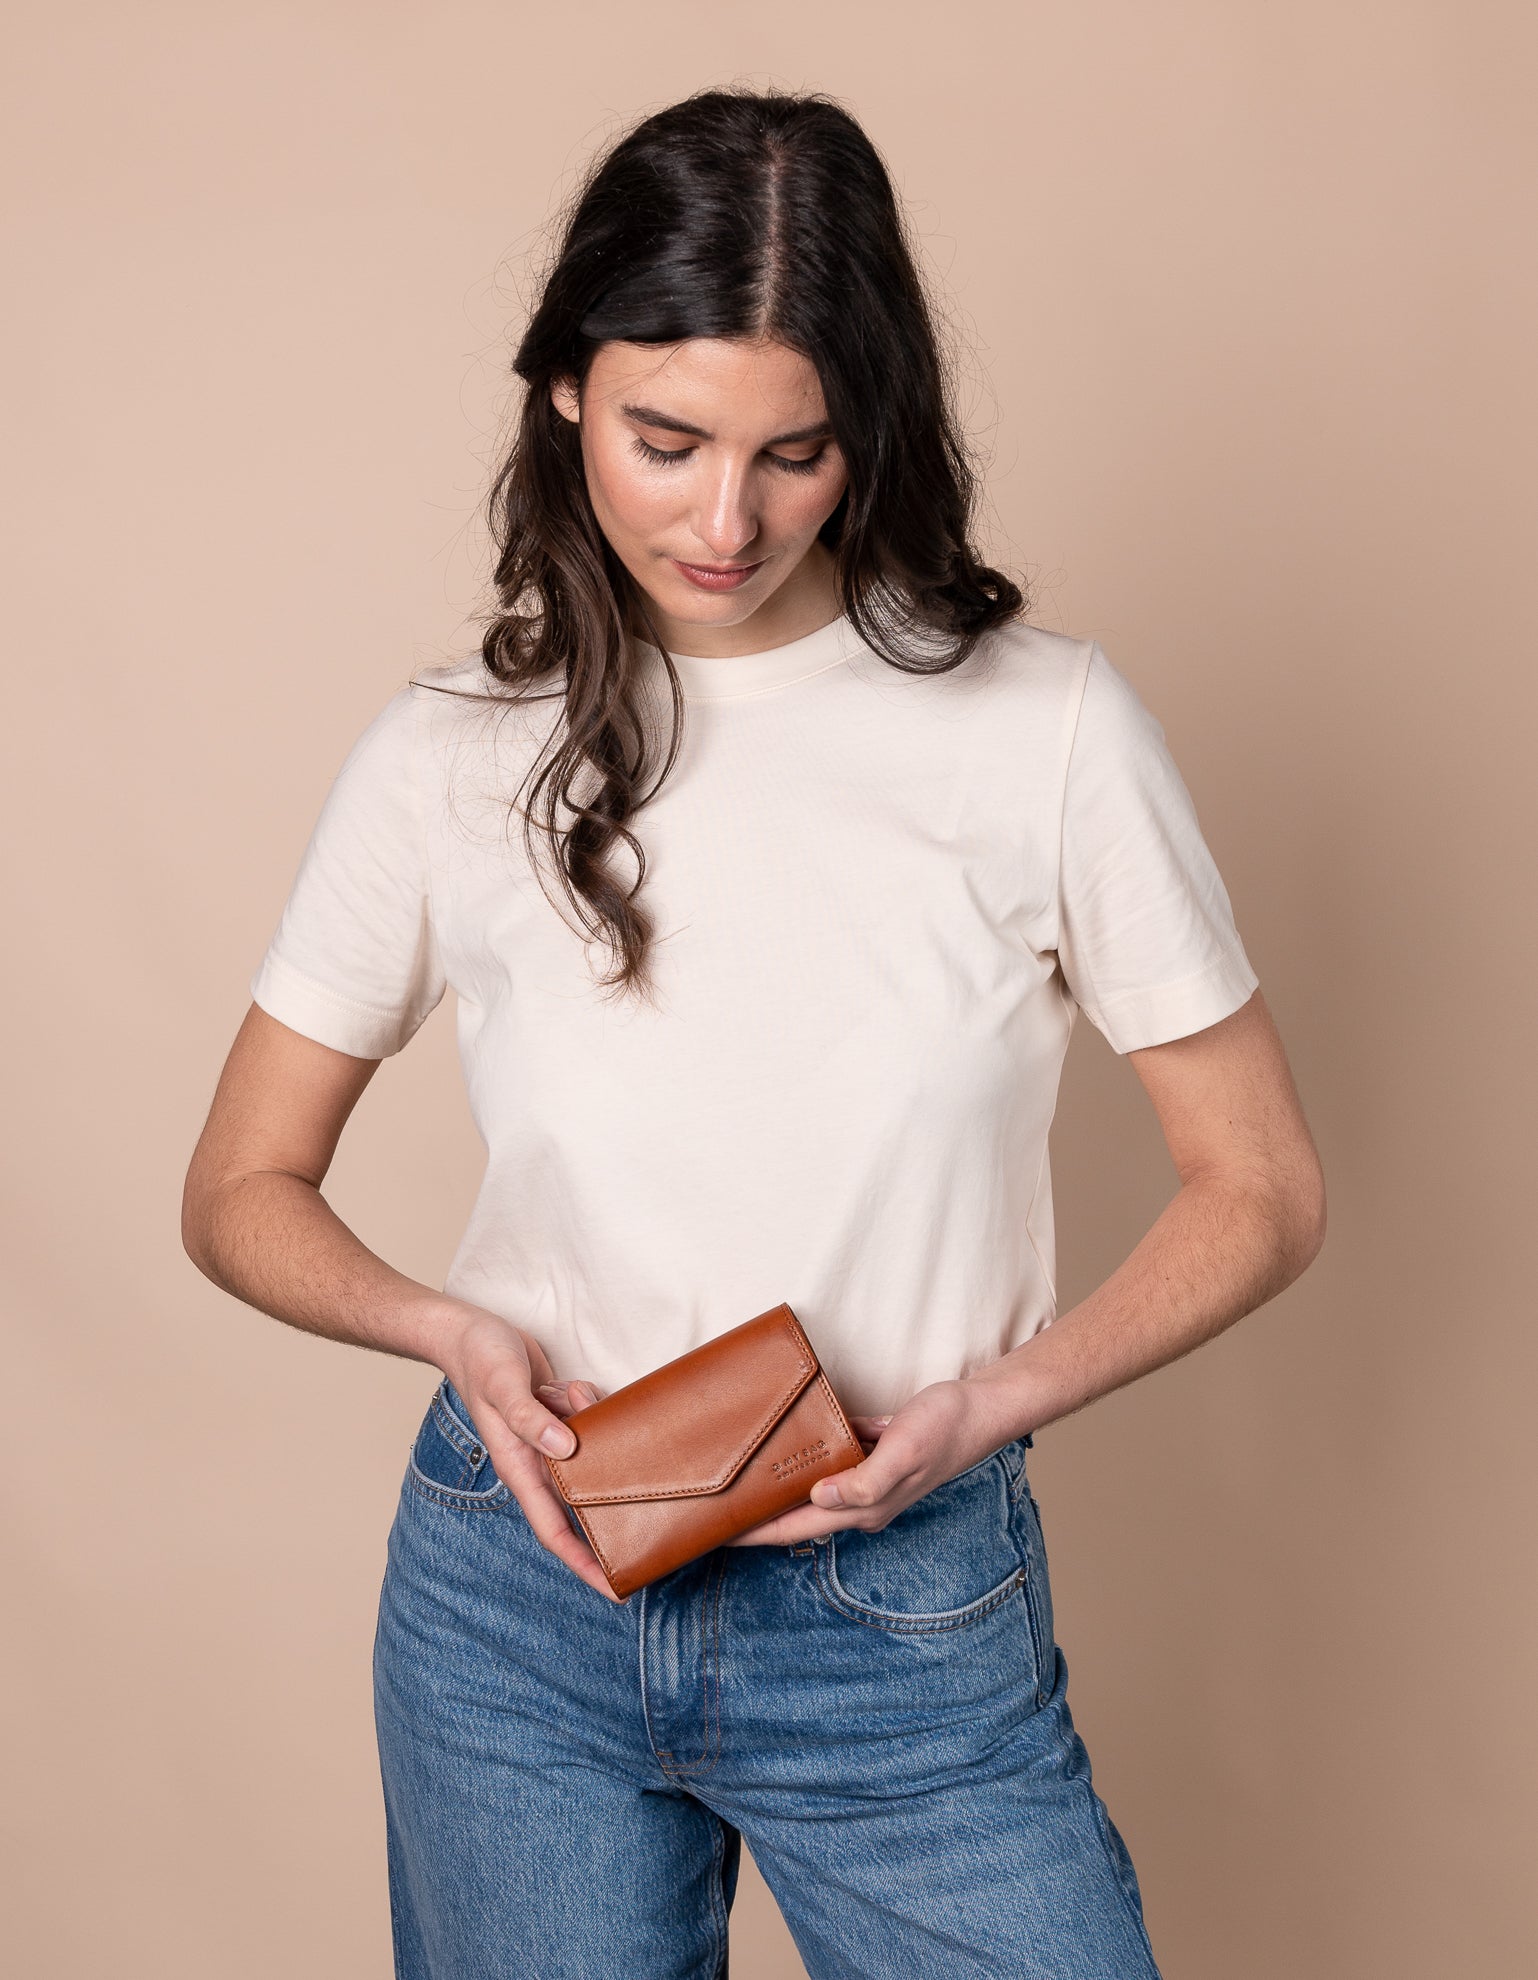 Jo's wallet - cognac classic leather with model